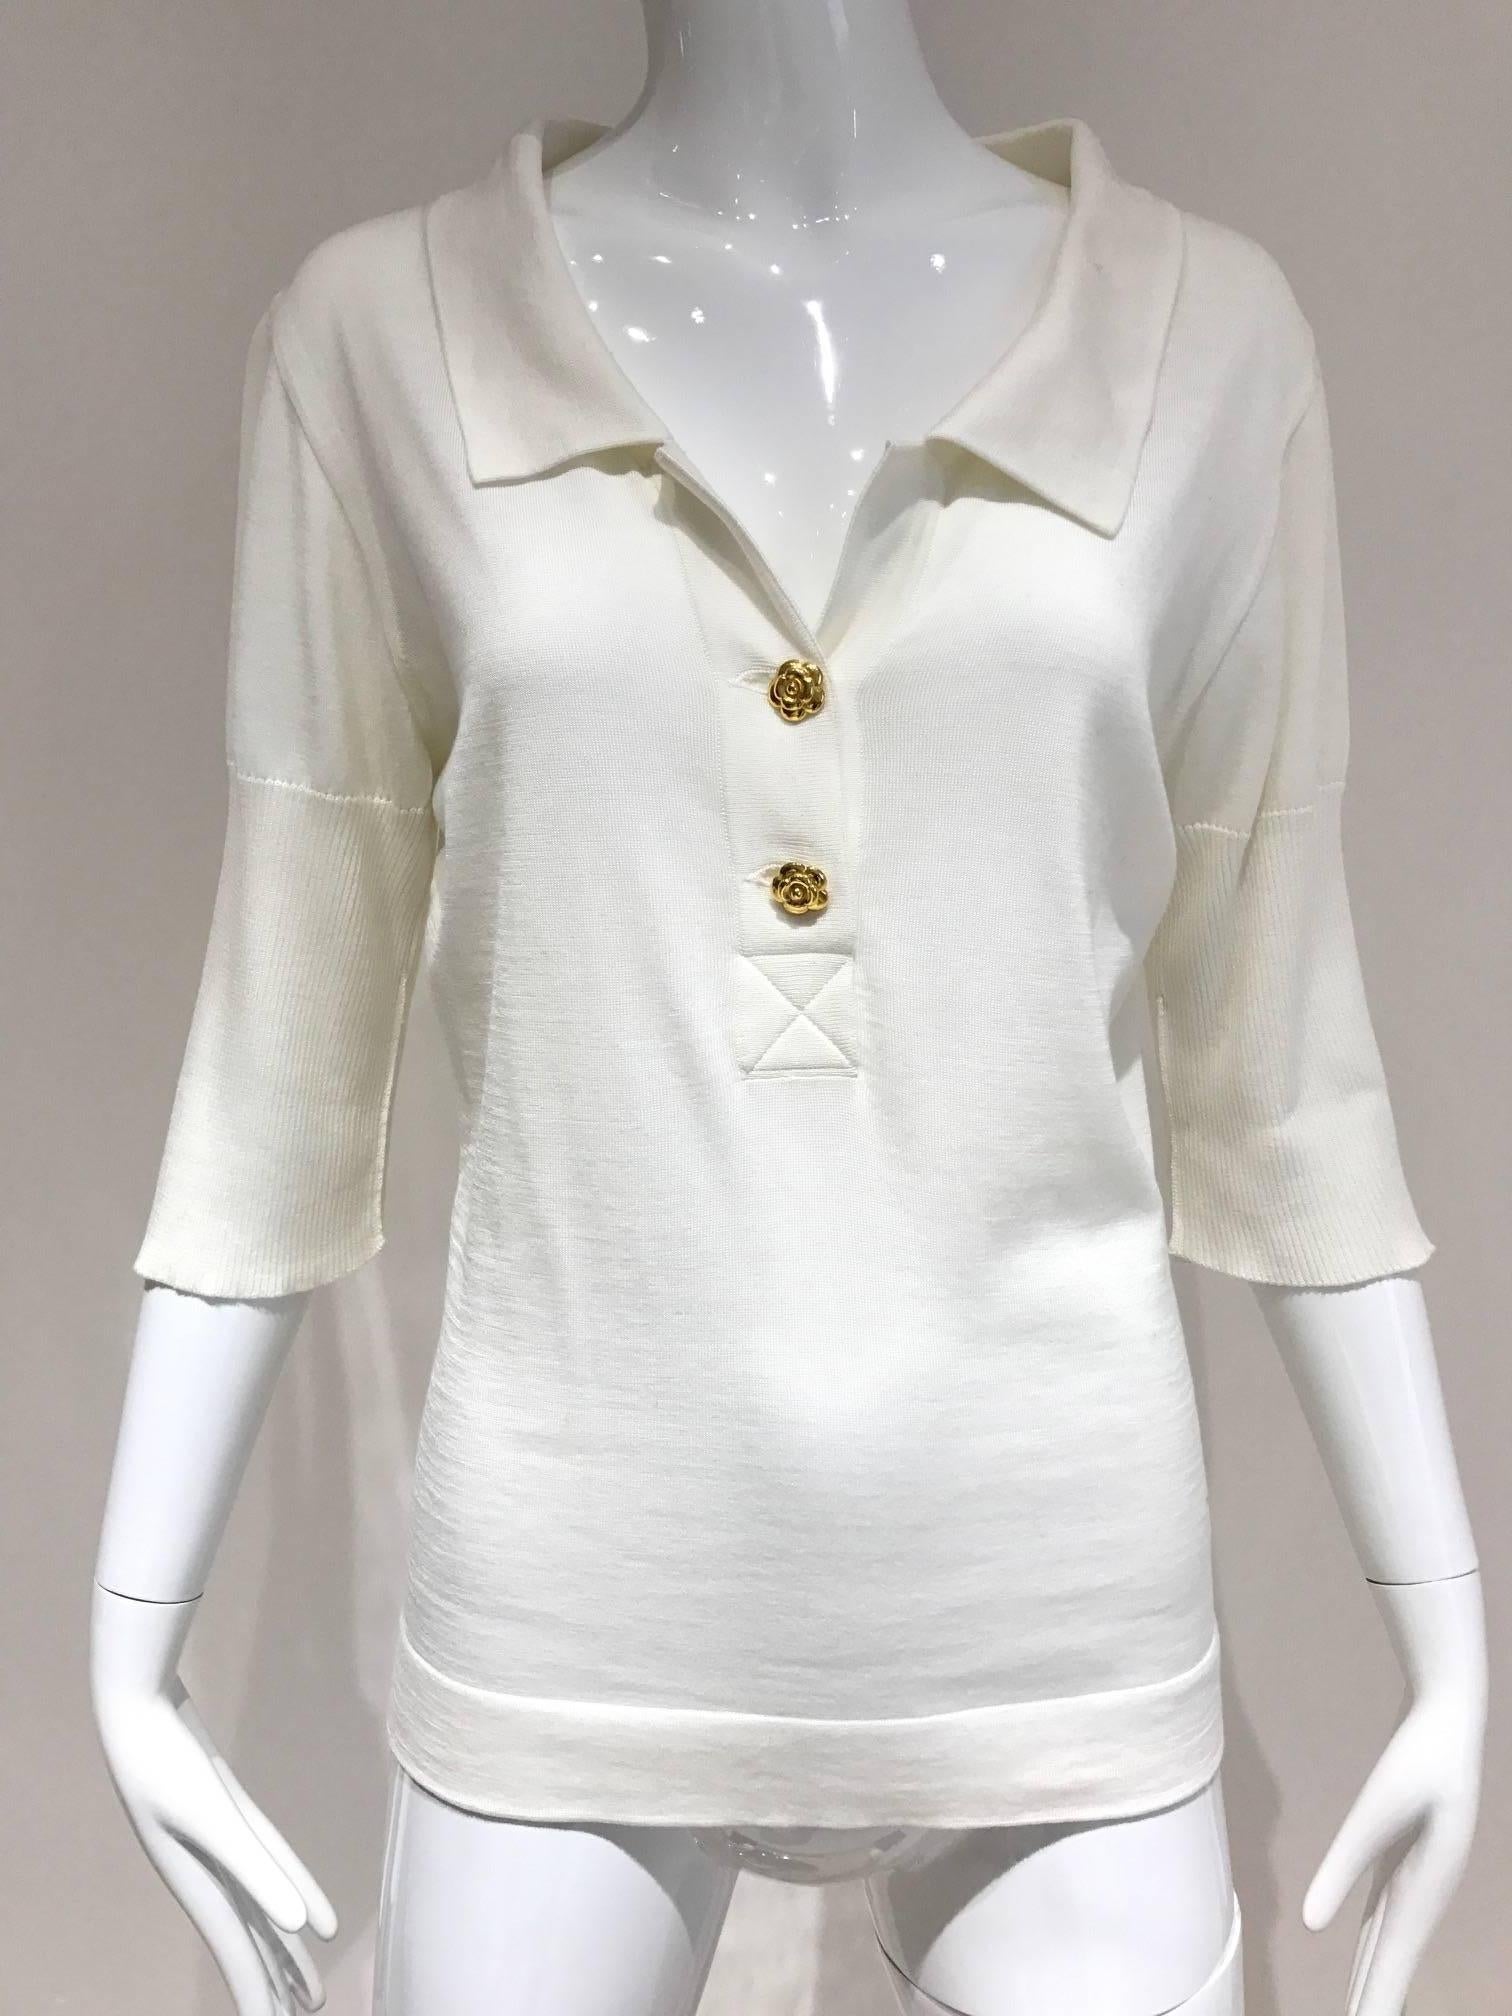 Vintage 1980s Chic CHANEL Off White Knit Sweater Top h gold camelia flower button . Fit size 2/4 SMALL
